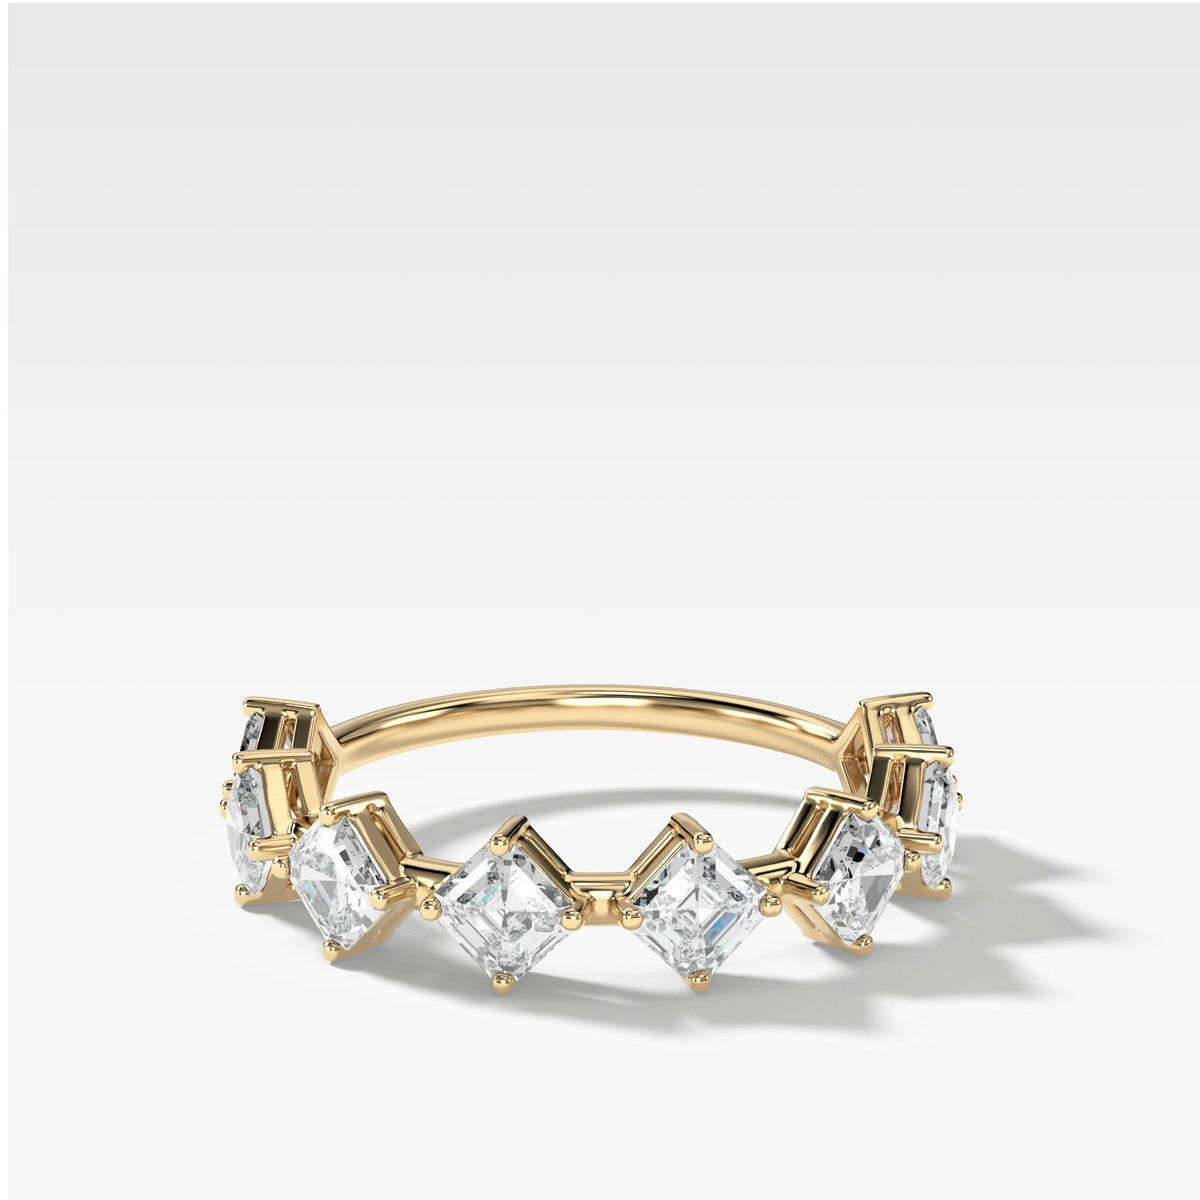 Spaced Asscher Cut Diamond Band by Good Stone available in Gold and Platinum